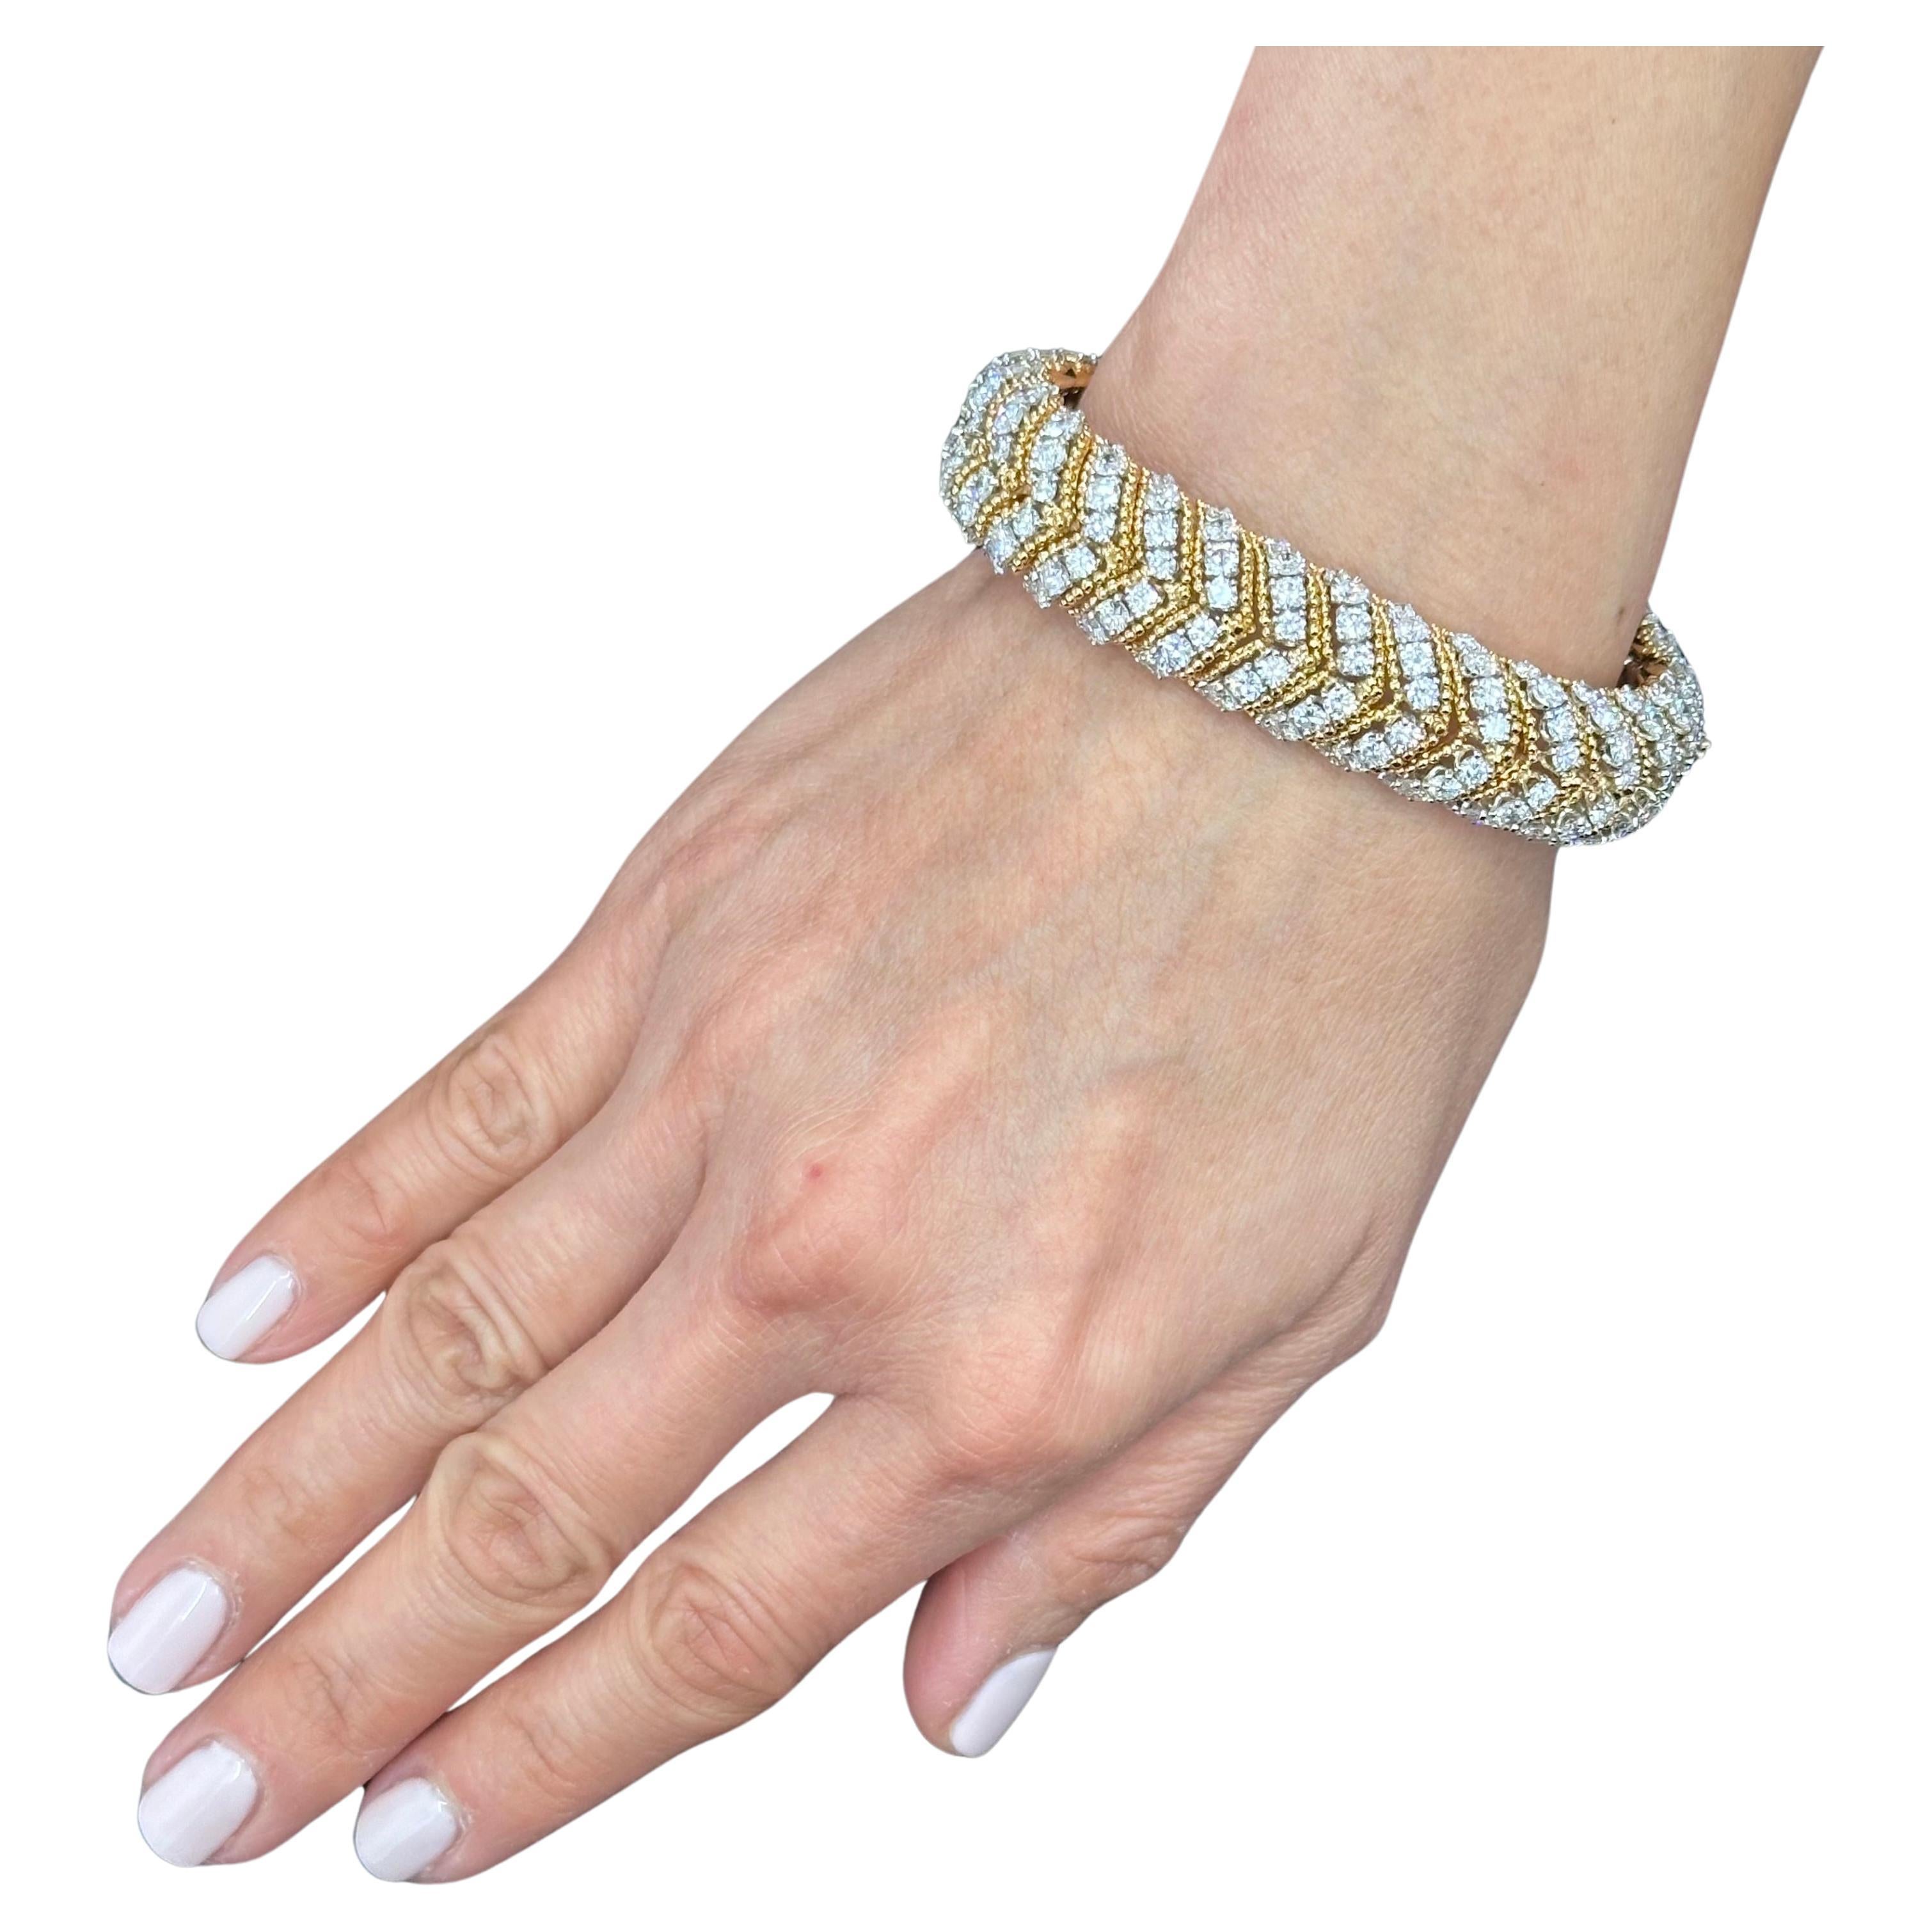 Van Cleef And Aprels Diamond , Yellow Gold and Platinum Bracelet Signed and numbered 
Diamond: Est. 20 cts  of D E VVS Quality Diamonds, 
Signed Van Cleef and Arpels with Numbers NY xxxx
circa 1960s, 
Length: 7.25 inches 
Width: 1/2 Inches
Well